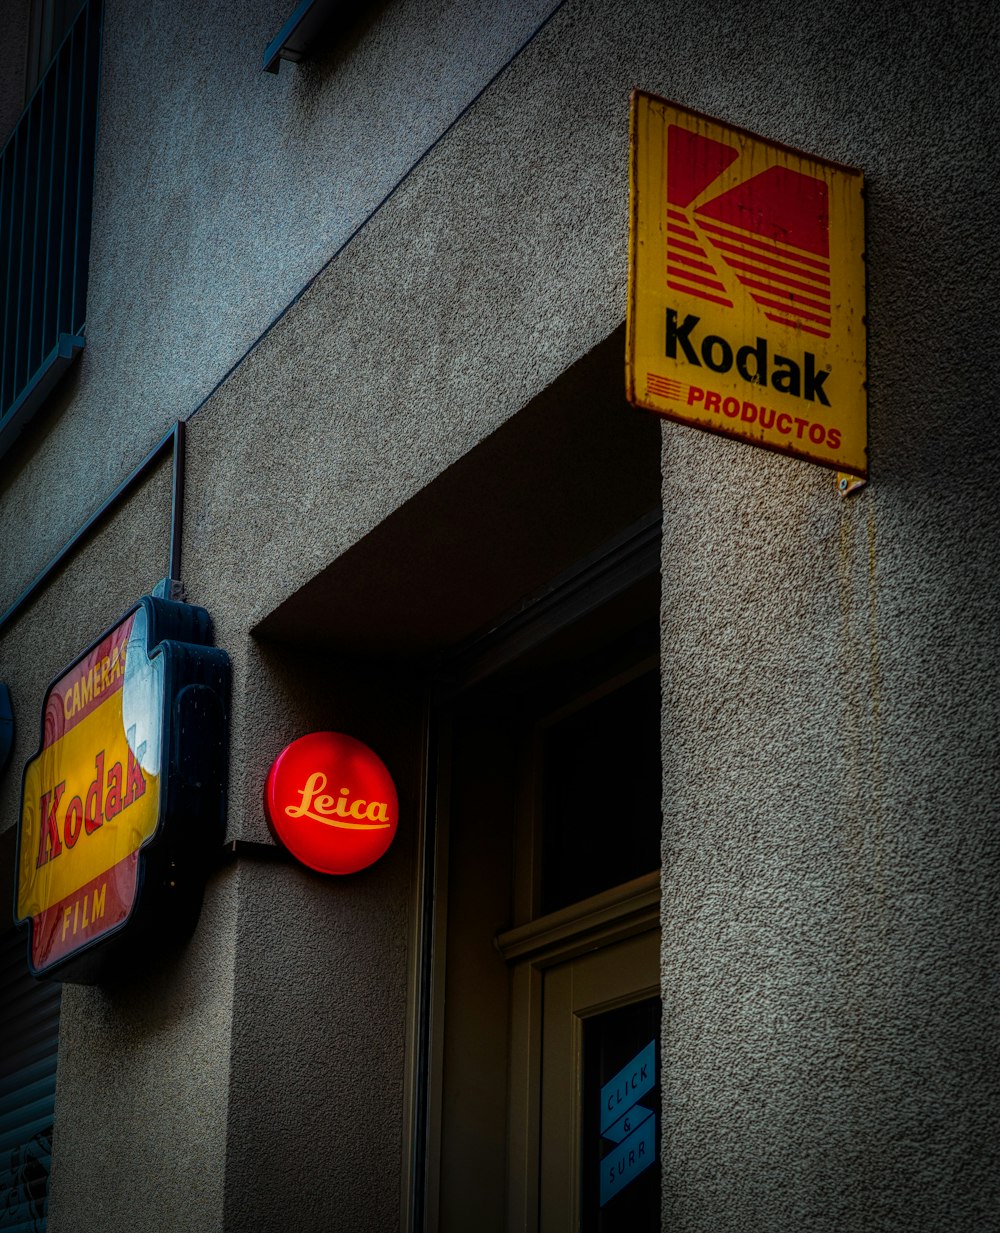 a kodak sign is hanging on the side of a building